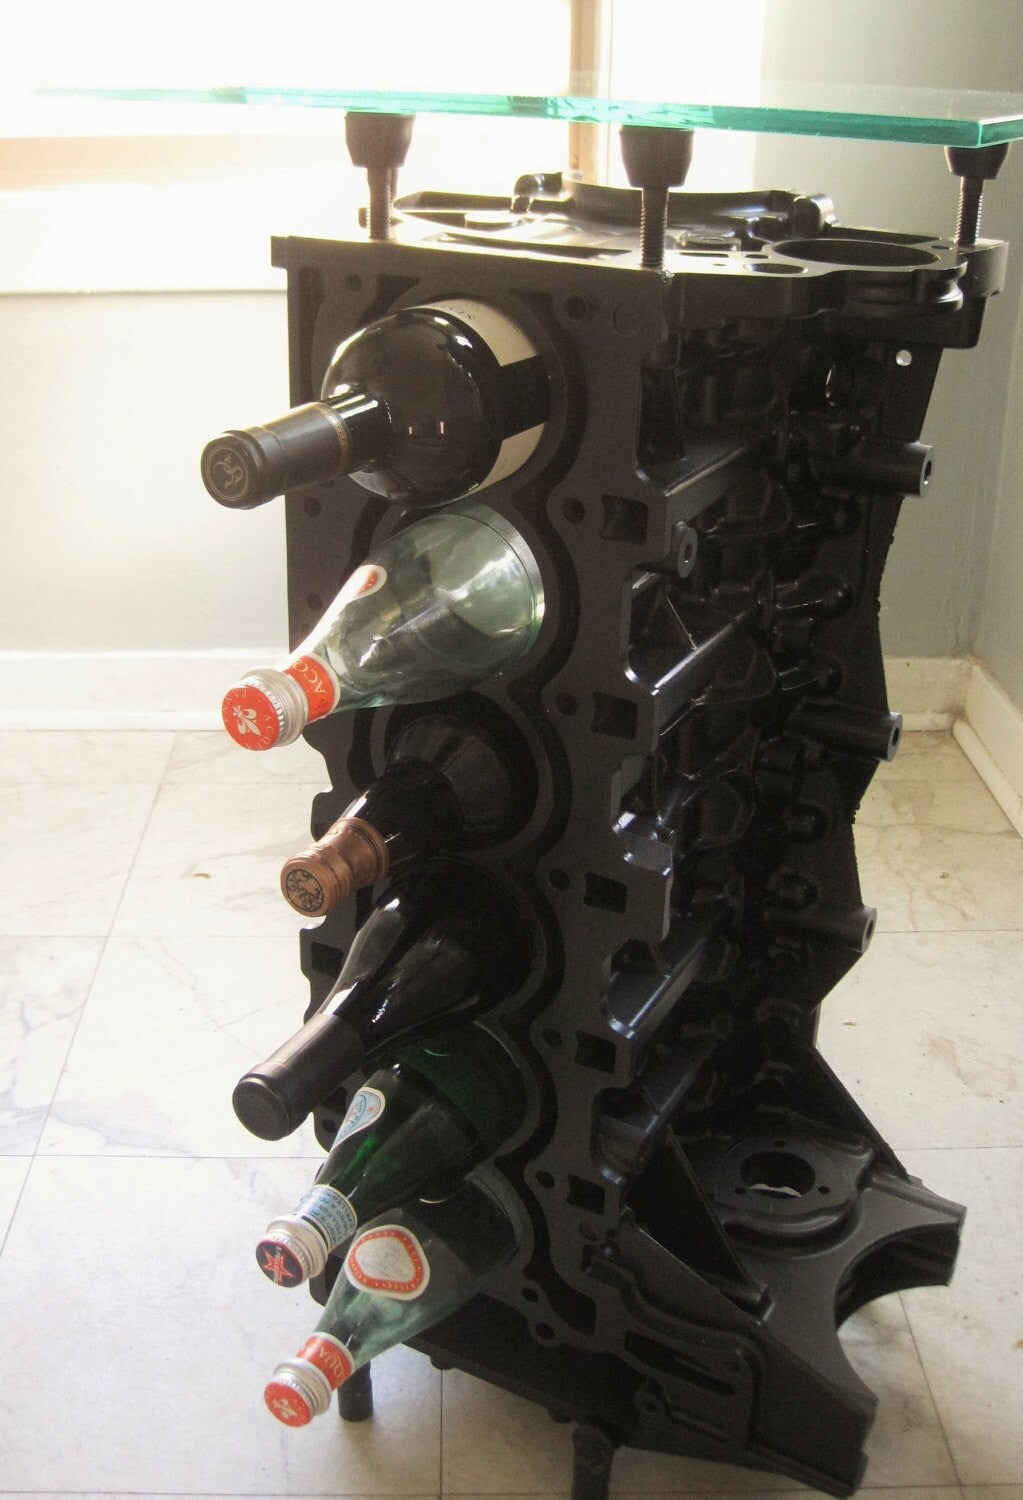 Engine block wine rack finished in black with a square glass top, bottles stored in its side.